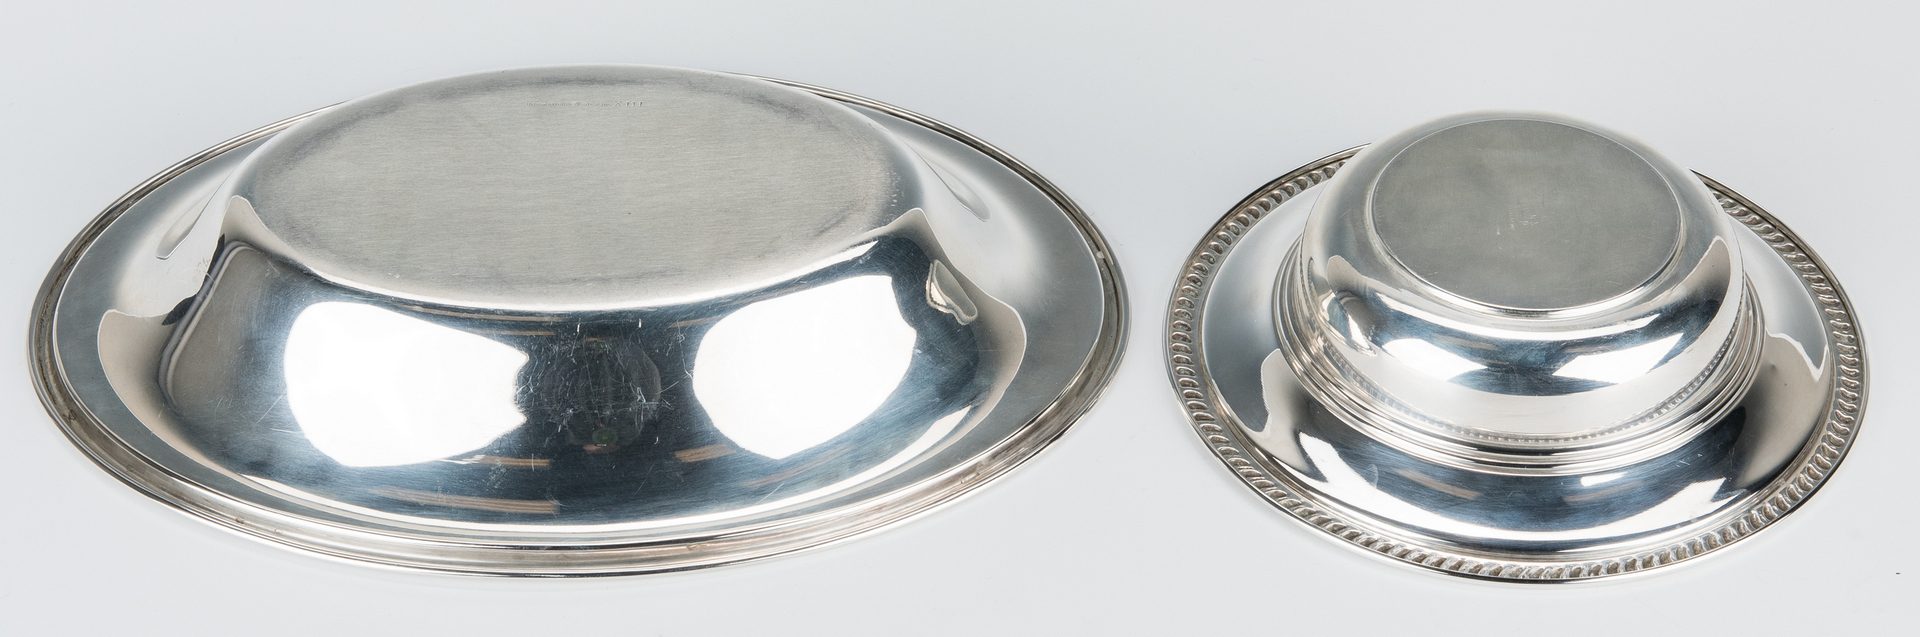 Lot 846: 4 Sterling Silver Serving Pieces